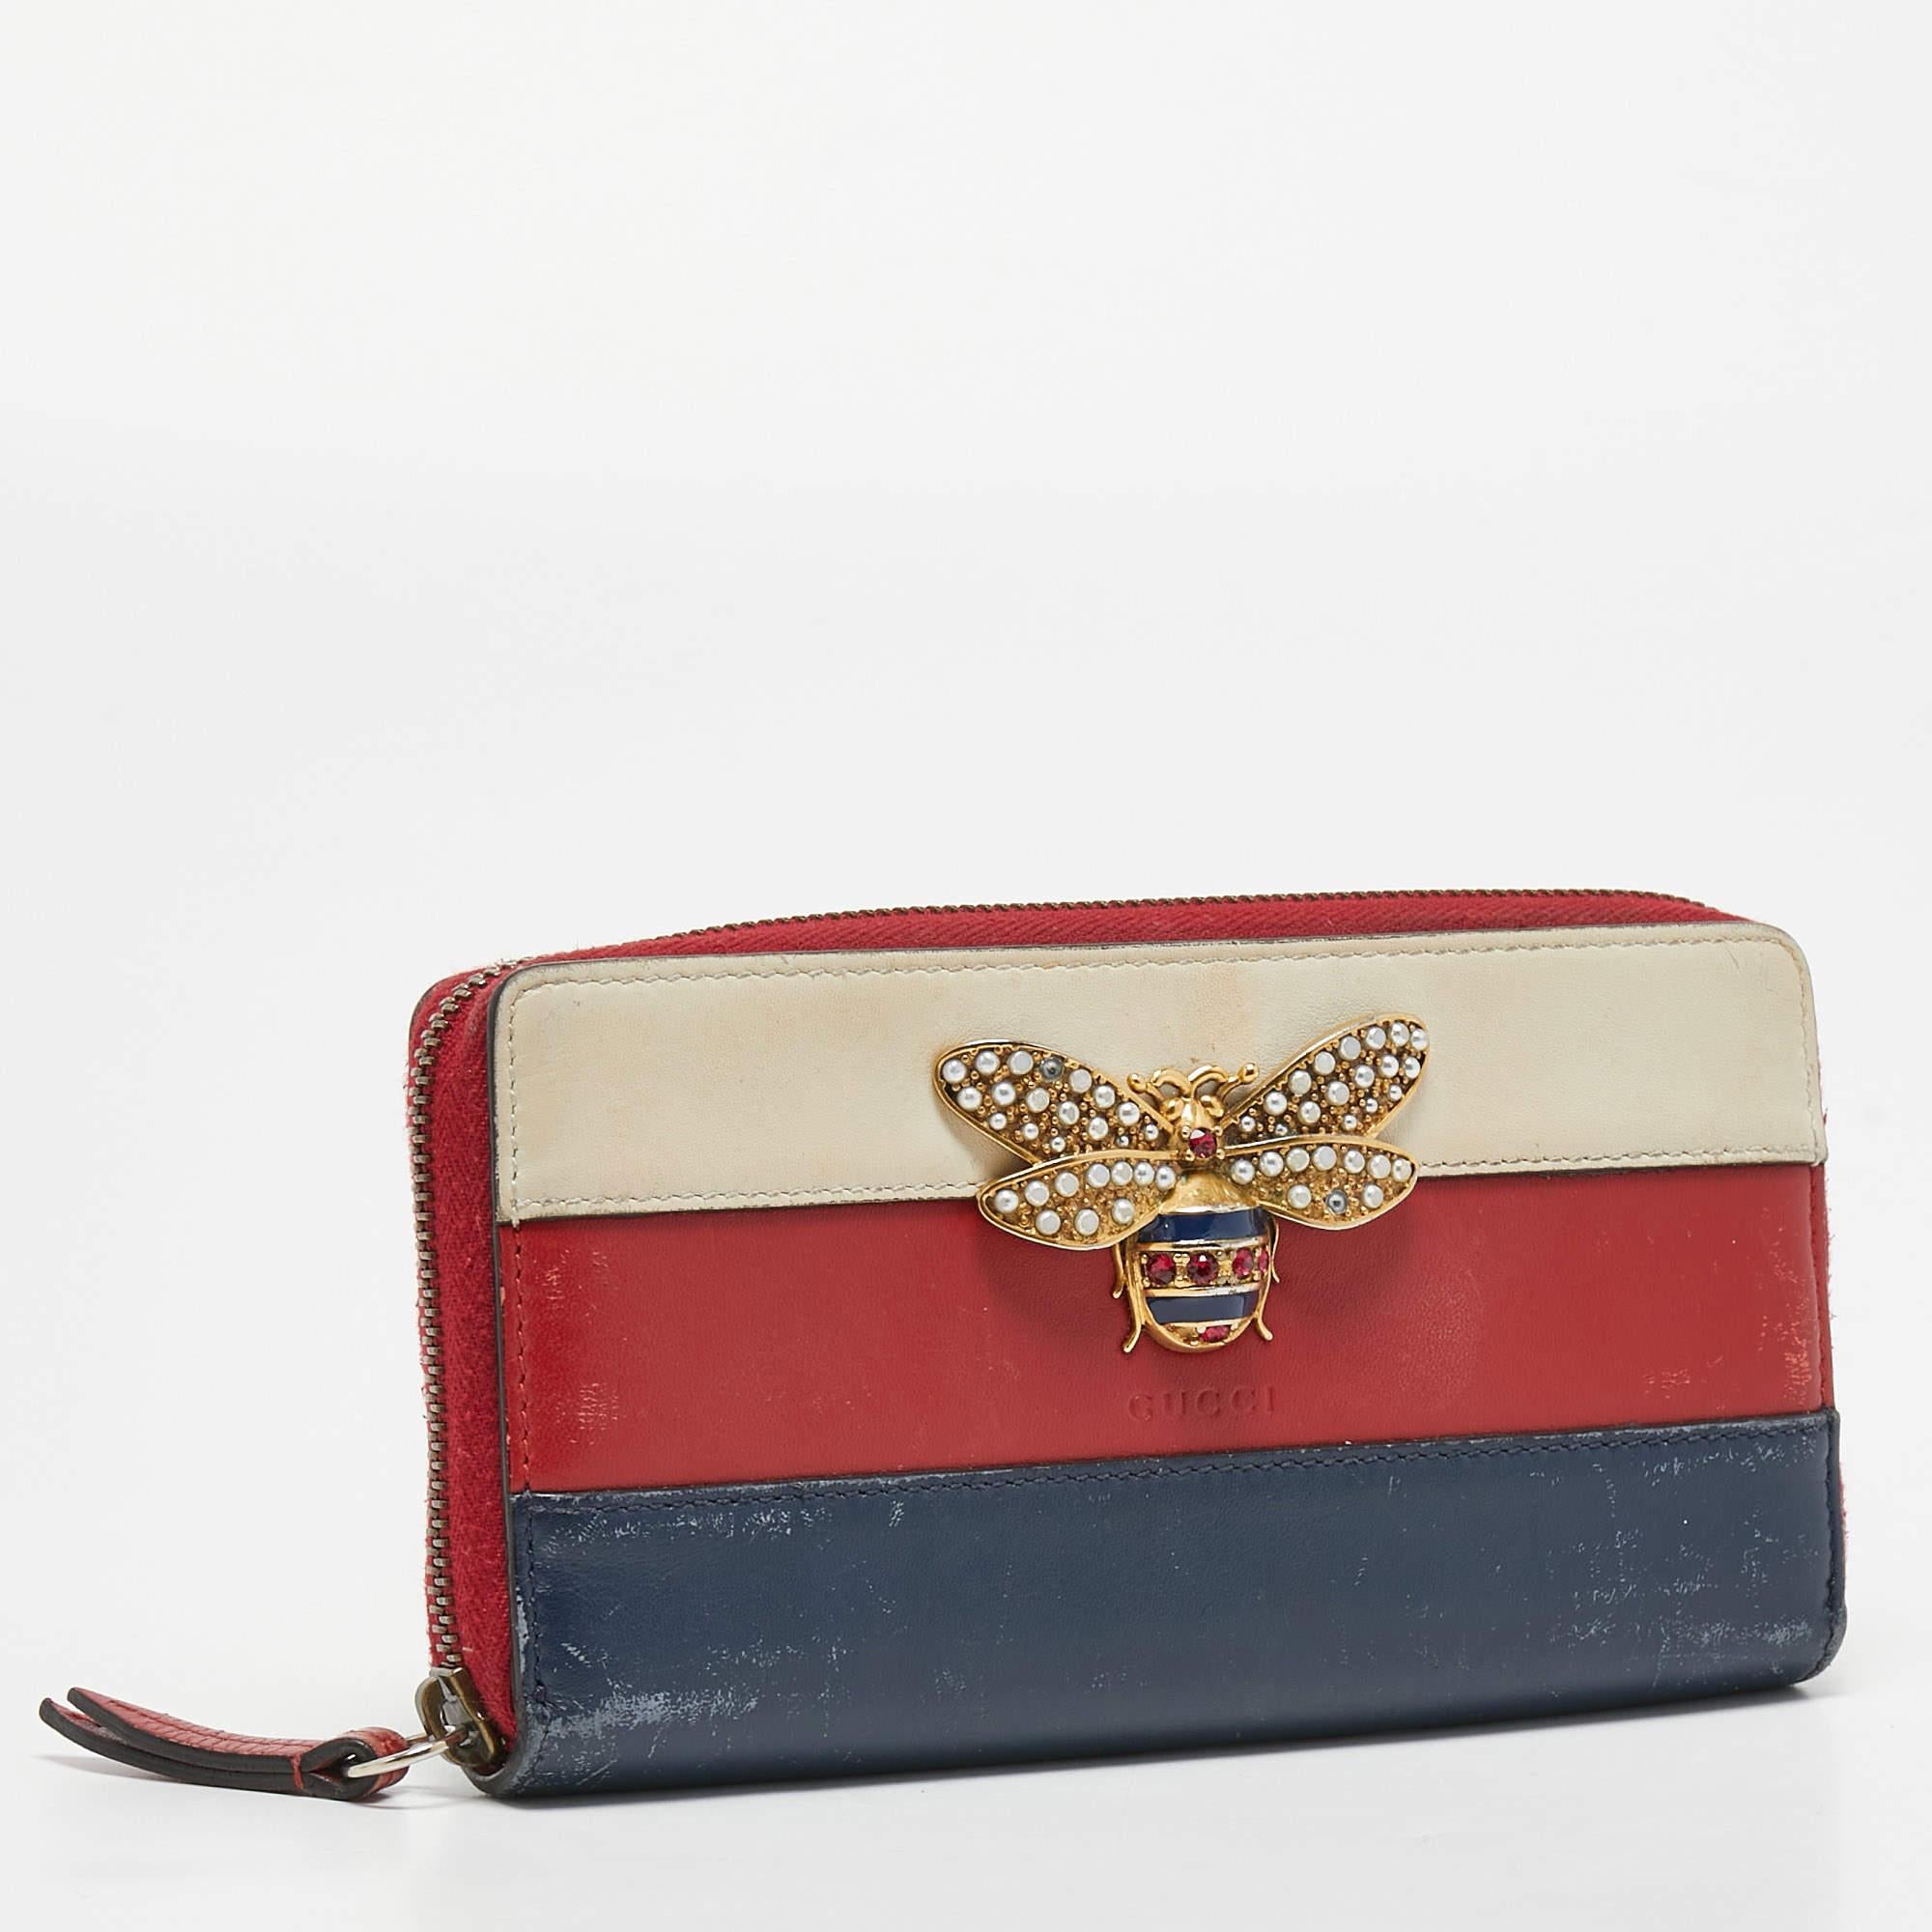 From the house of Gucci, this Queen Margaret wallet is an outstanding fusion of brilliance and timeless style. Exhibiting an impressive design, it an embellished flap and a compartmentalized interior.

